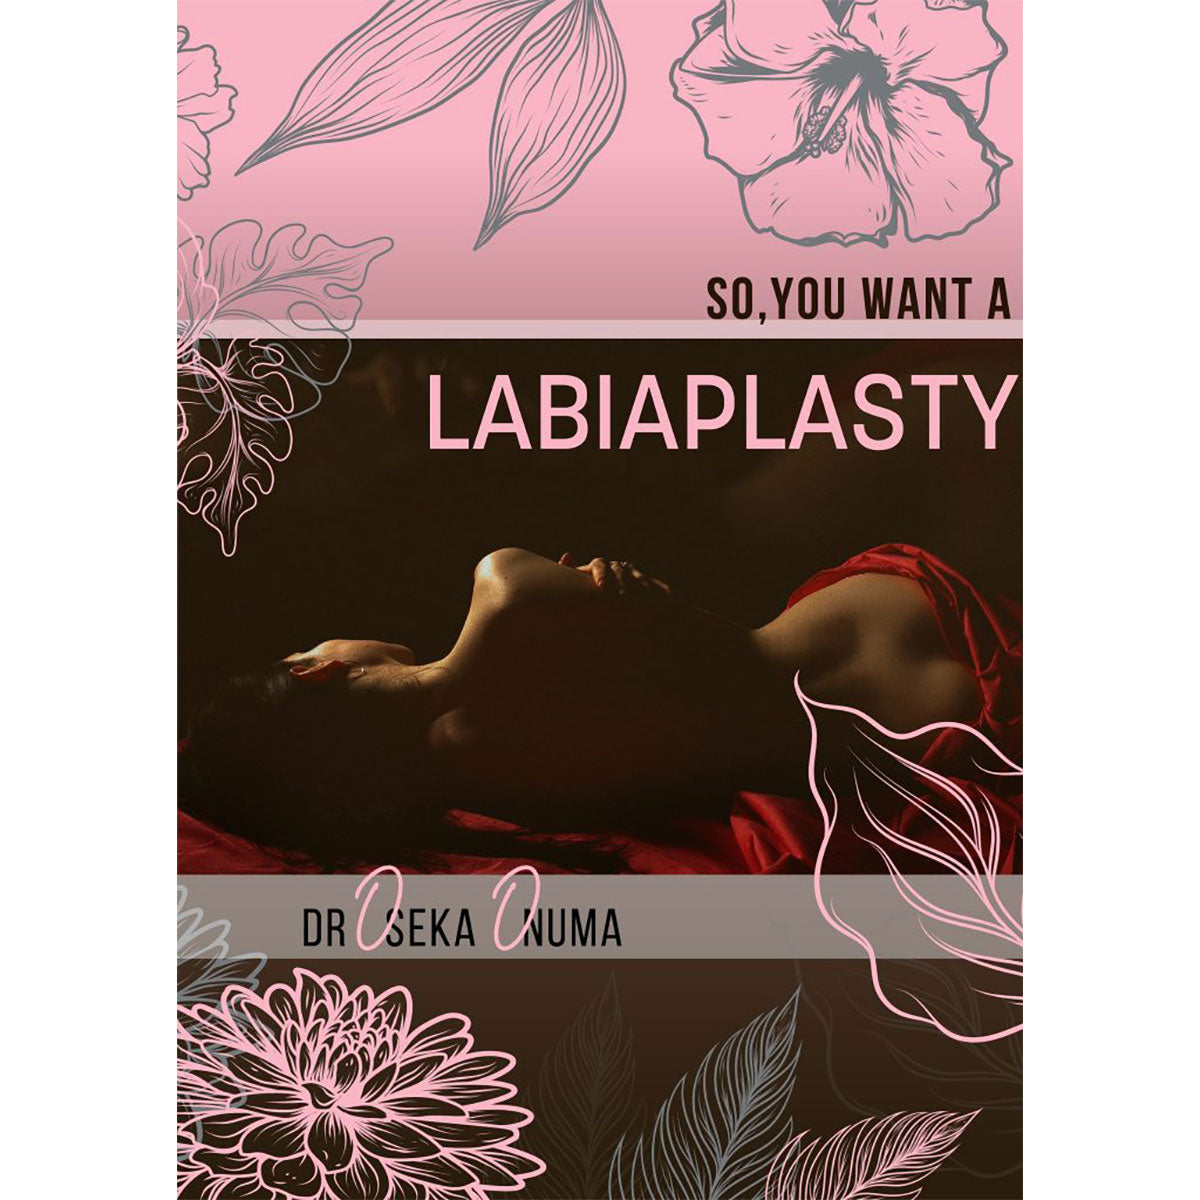 So, You Want a Labiaplasty